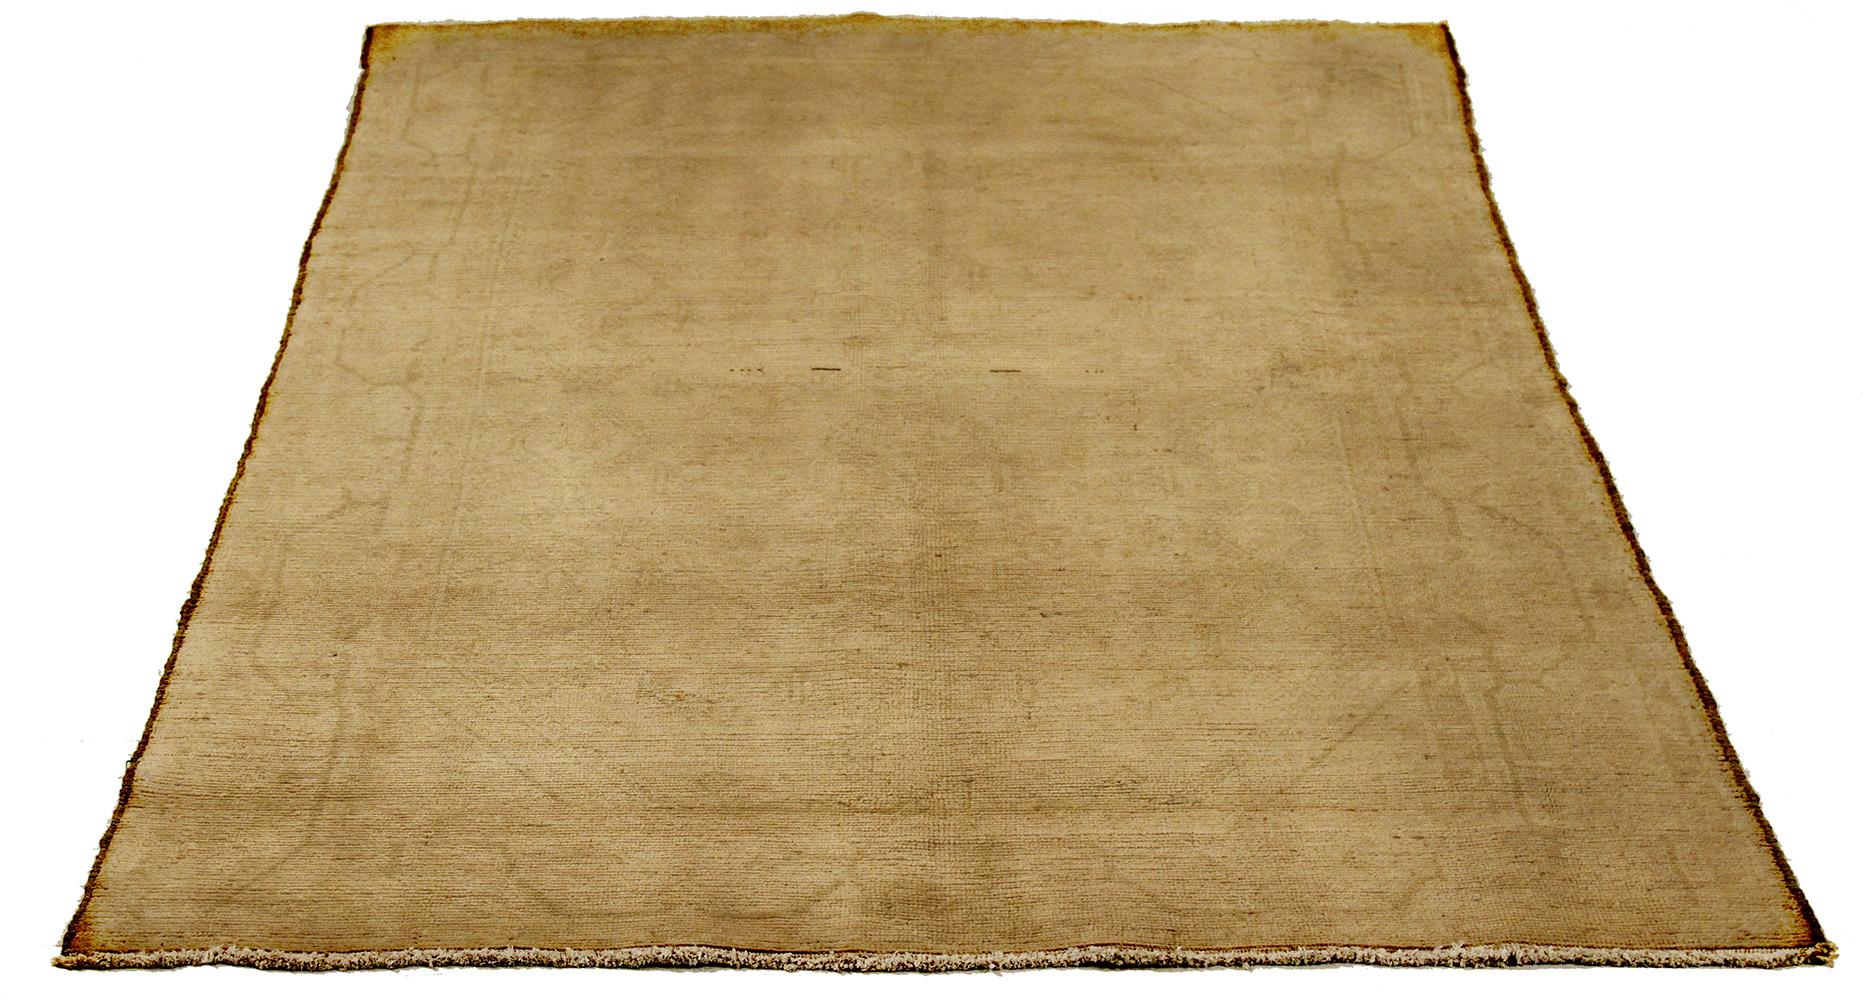 Antique Persian runner rug handwoven from the finest sheep’s wool and colored with all-natural vegetable dyes that are safe for humans and pets. It’s a traditional Malayer design featuring faded botanical details over an ivory field. It’s a lovely